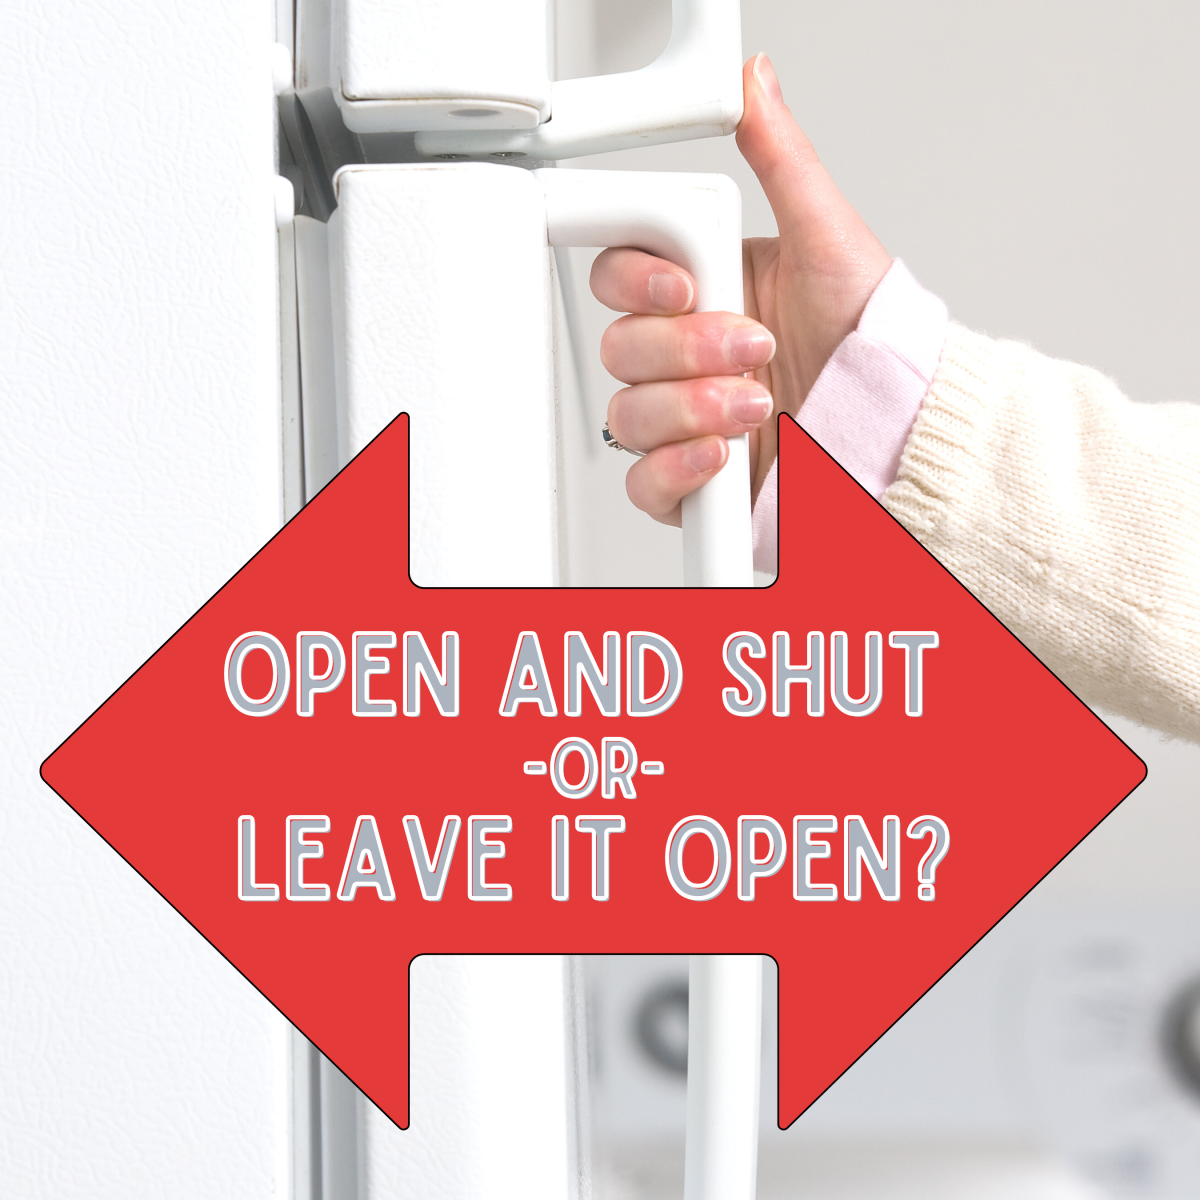 Leaving the fridge door open or opening and shutting: Which is better?